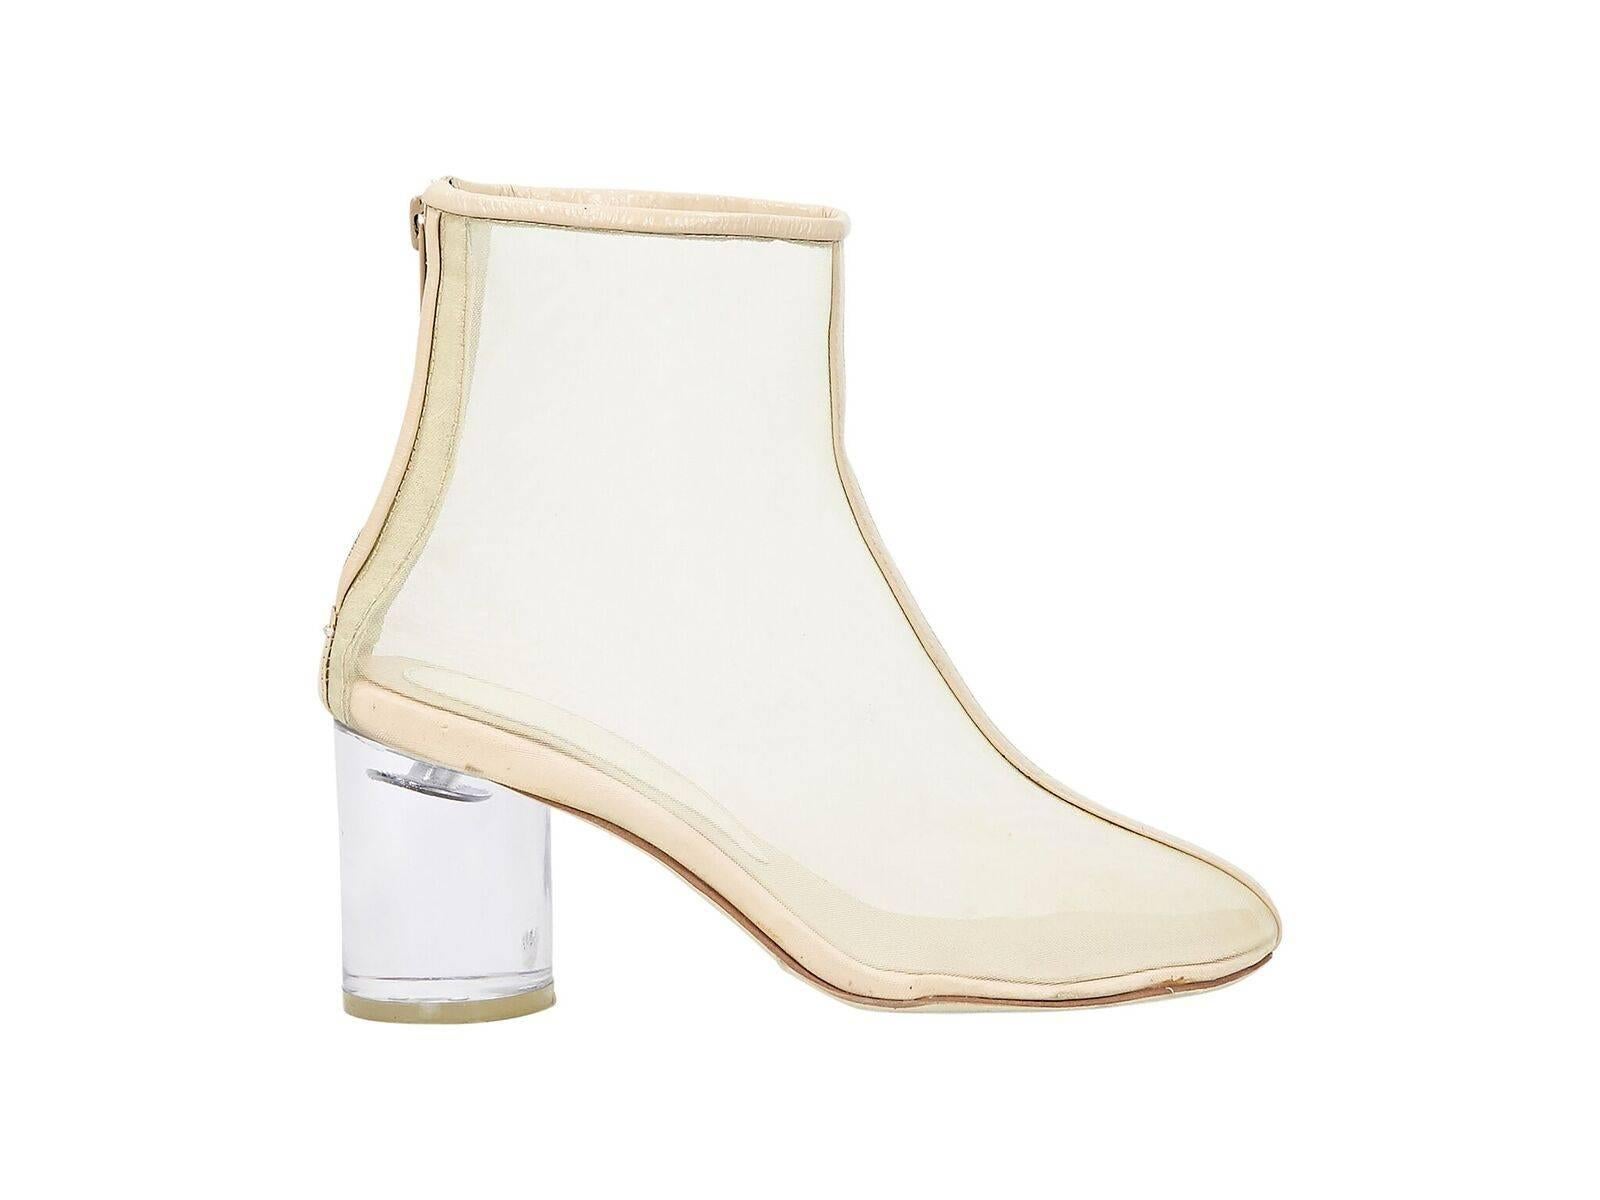 Product details:  Sheer mesh ankle boots by Maison Martin Margiela.  Trimmed with nude leather.  Round toe.  Clear block heel.  Back zip closure.  
Est. Retail $657